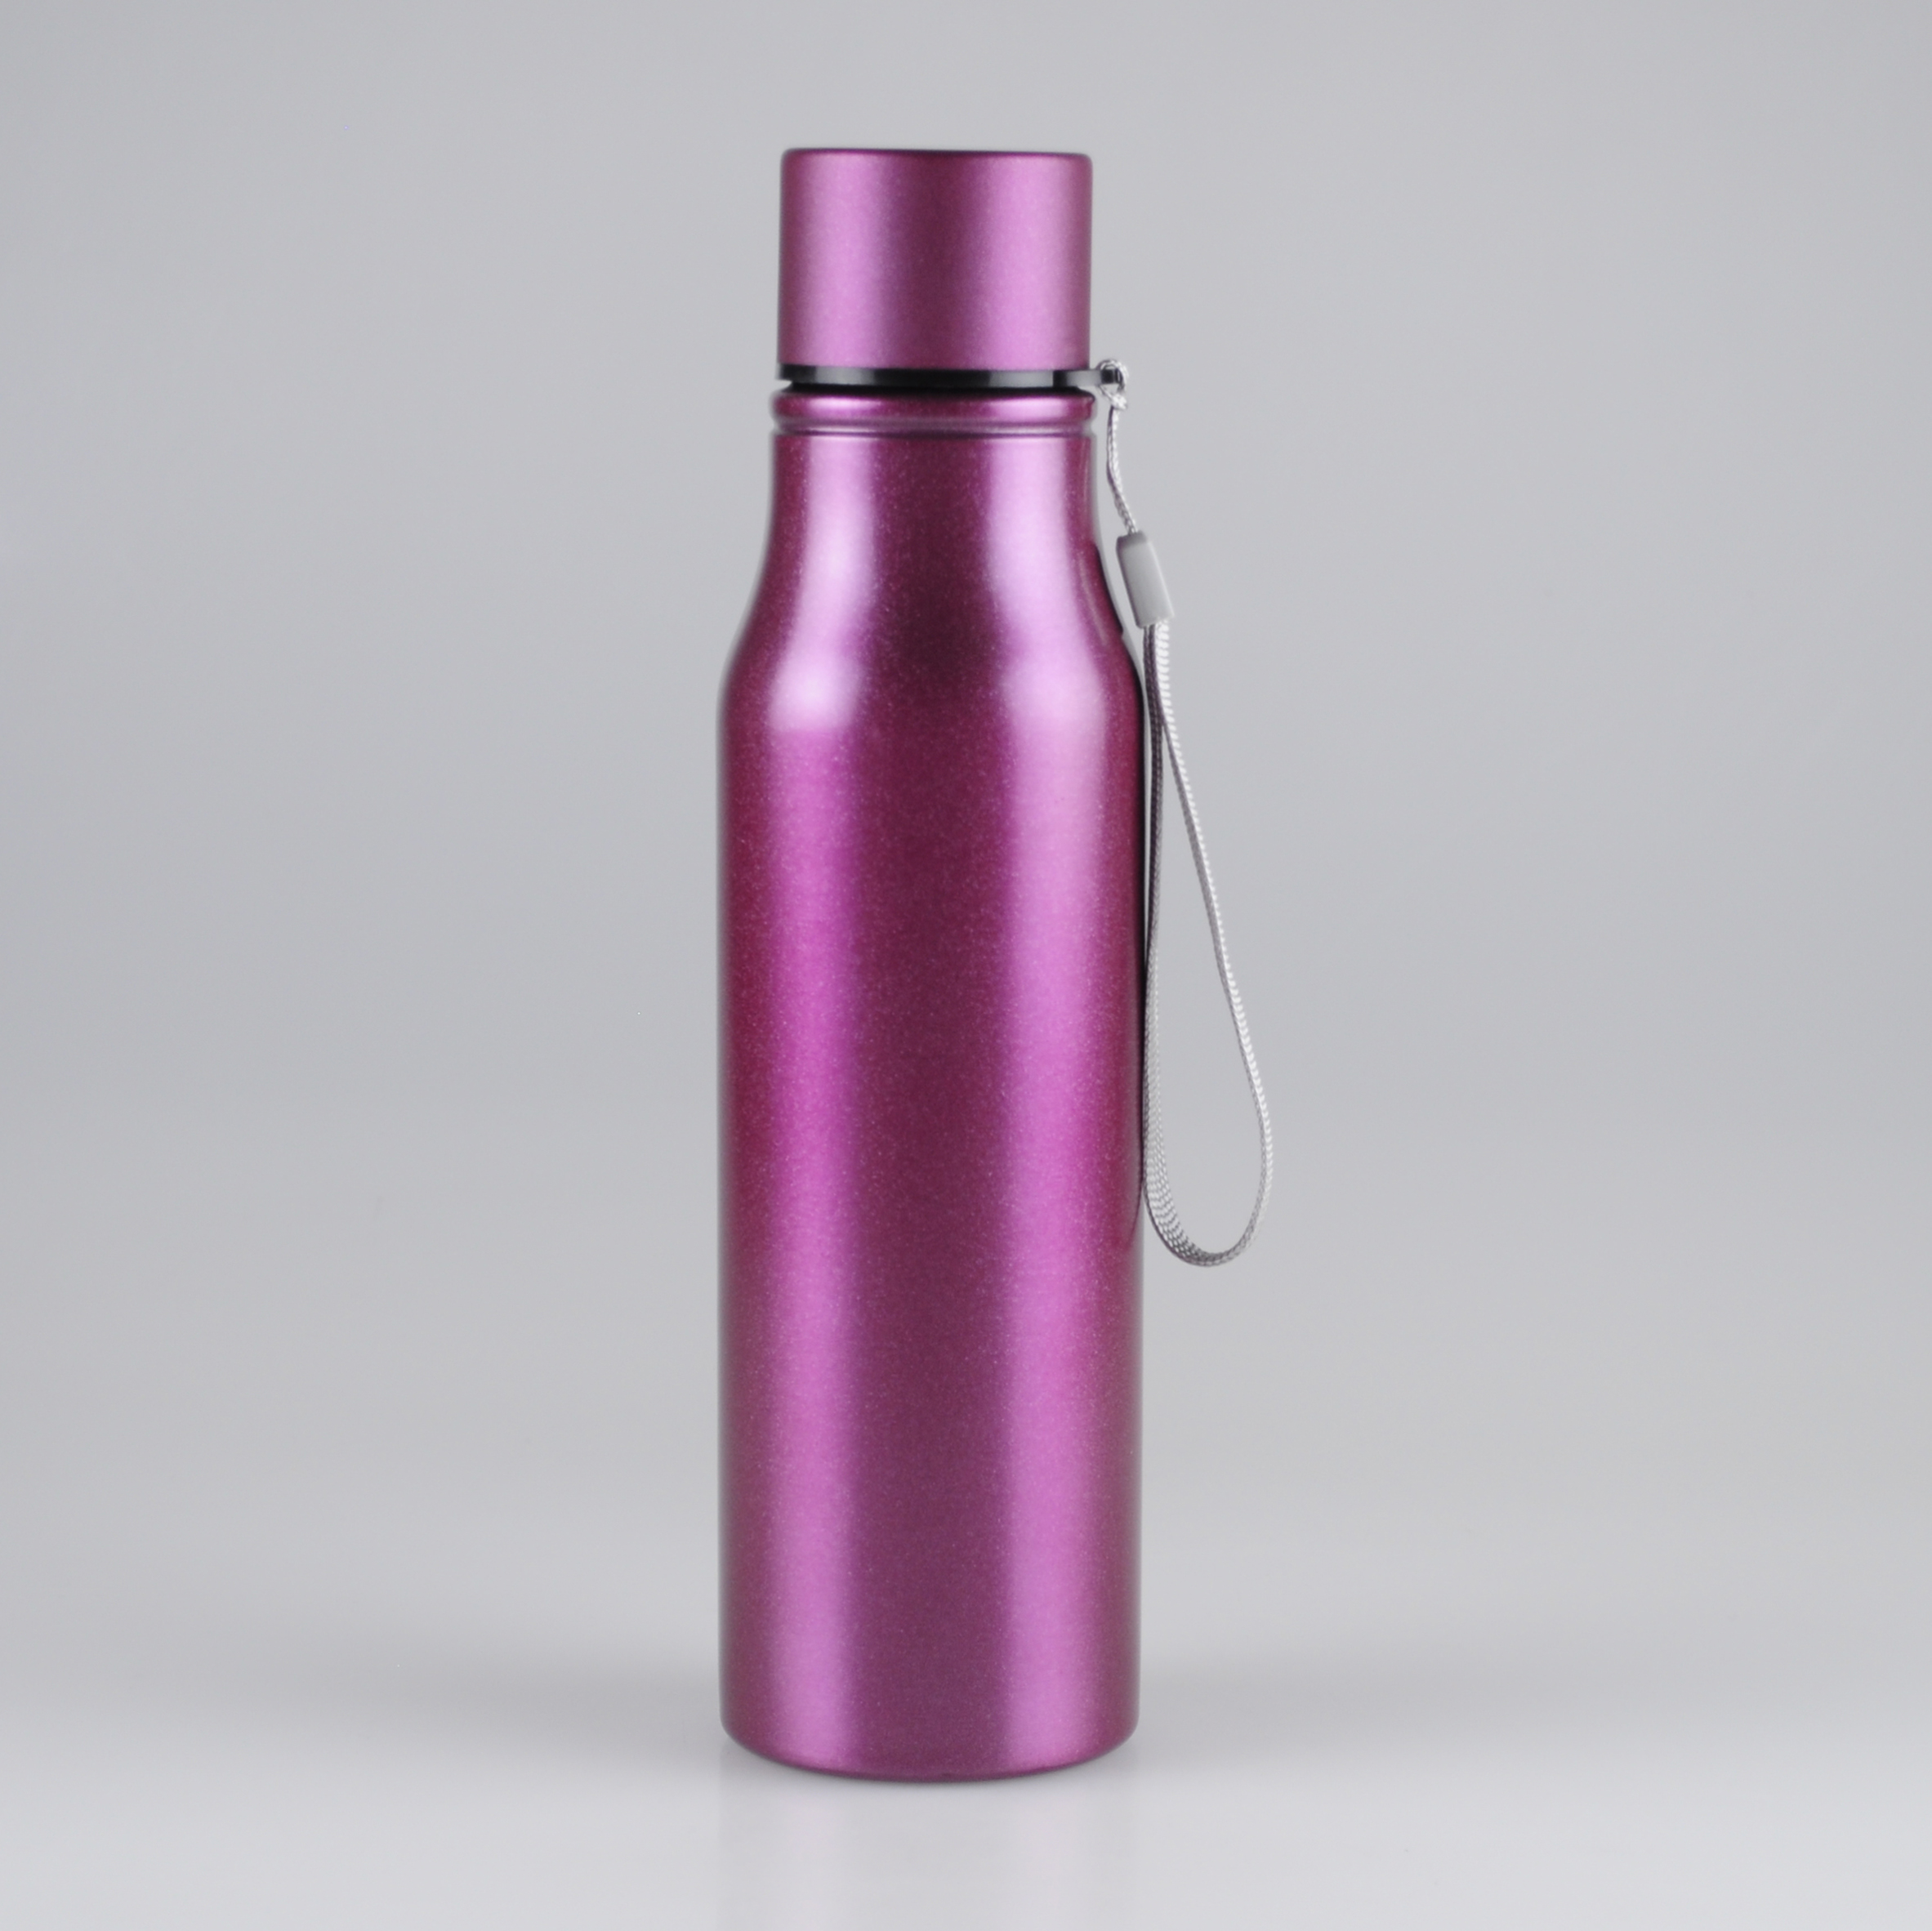 600ml-screwed-cap-stainless-steel-drink-bottles-with-carrying-strap (1)